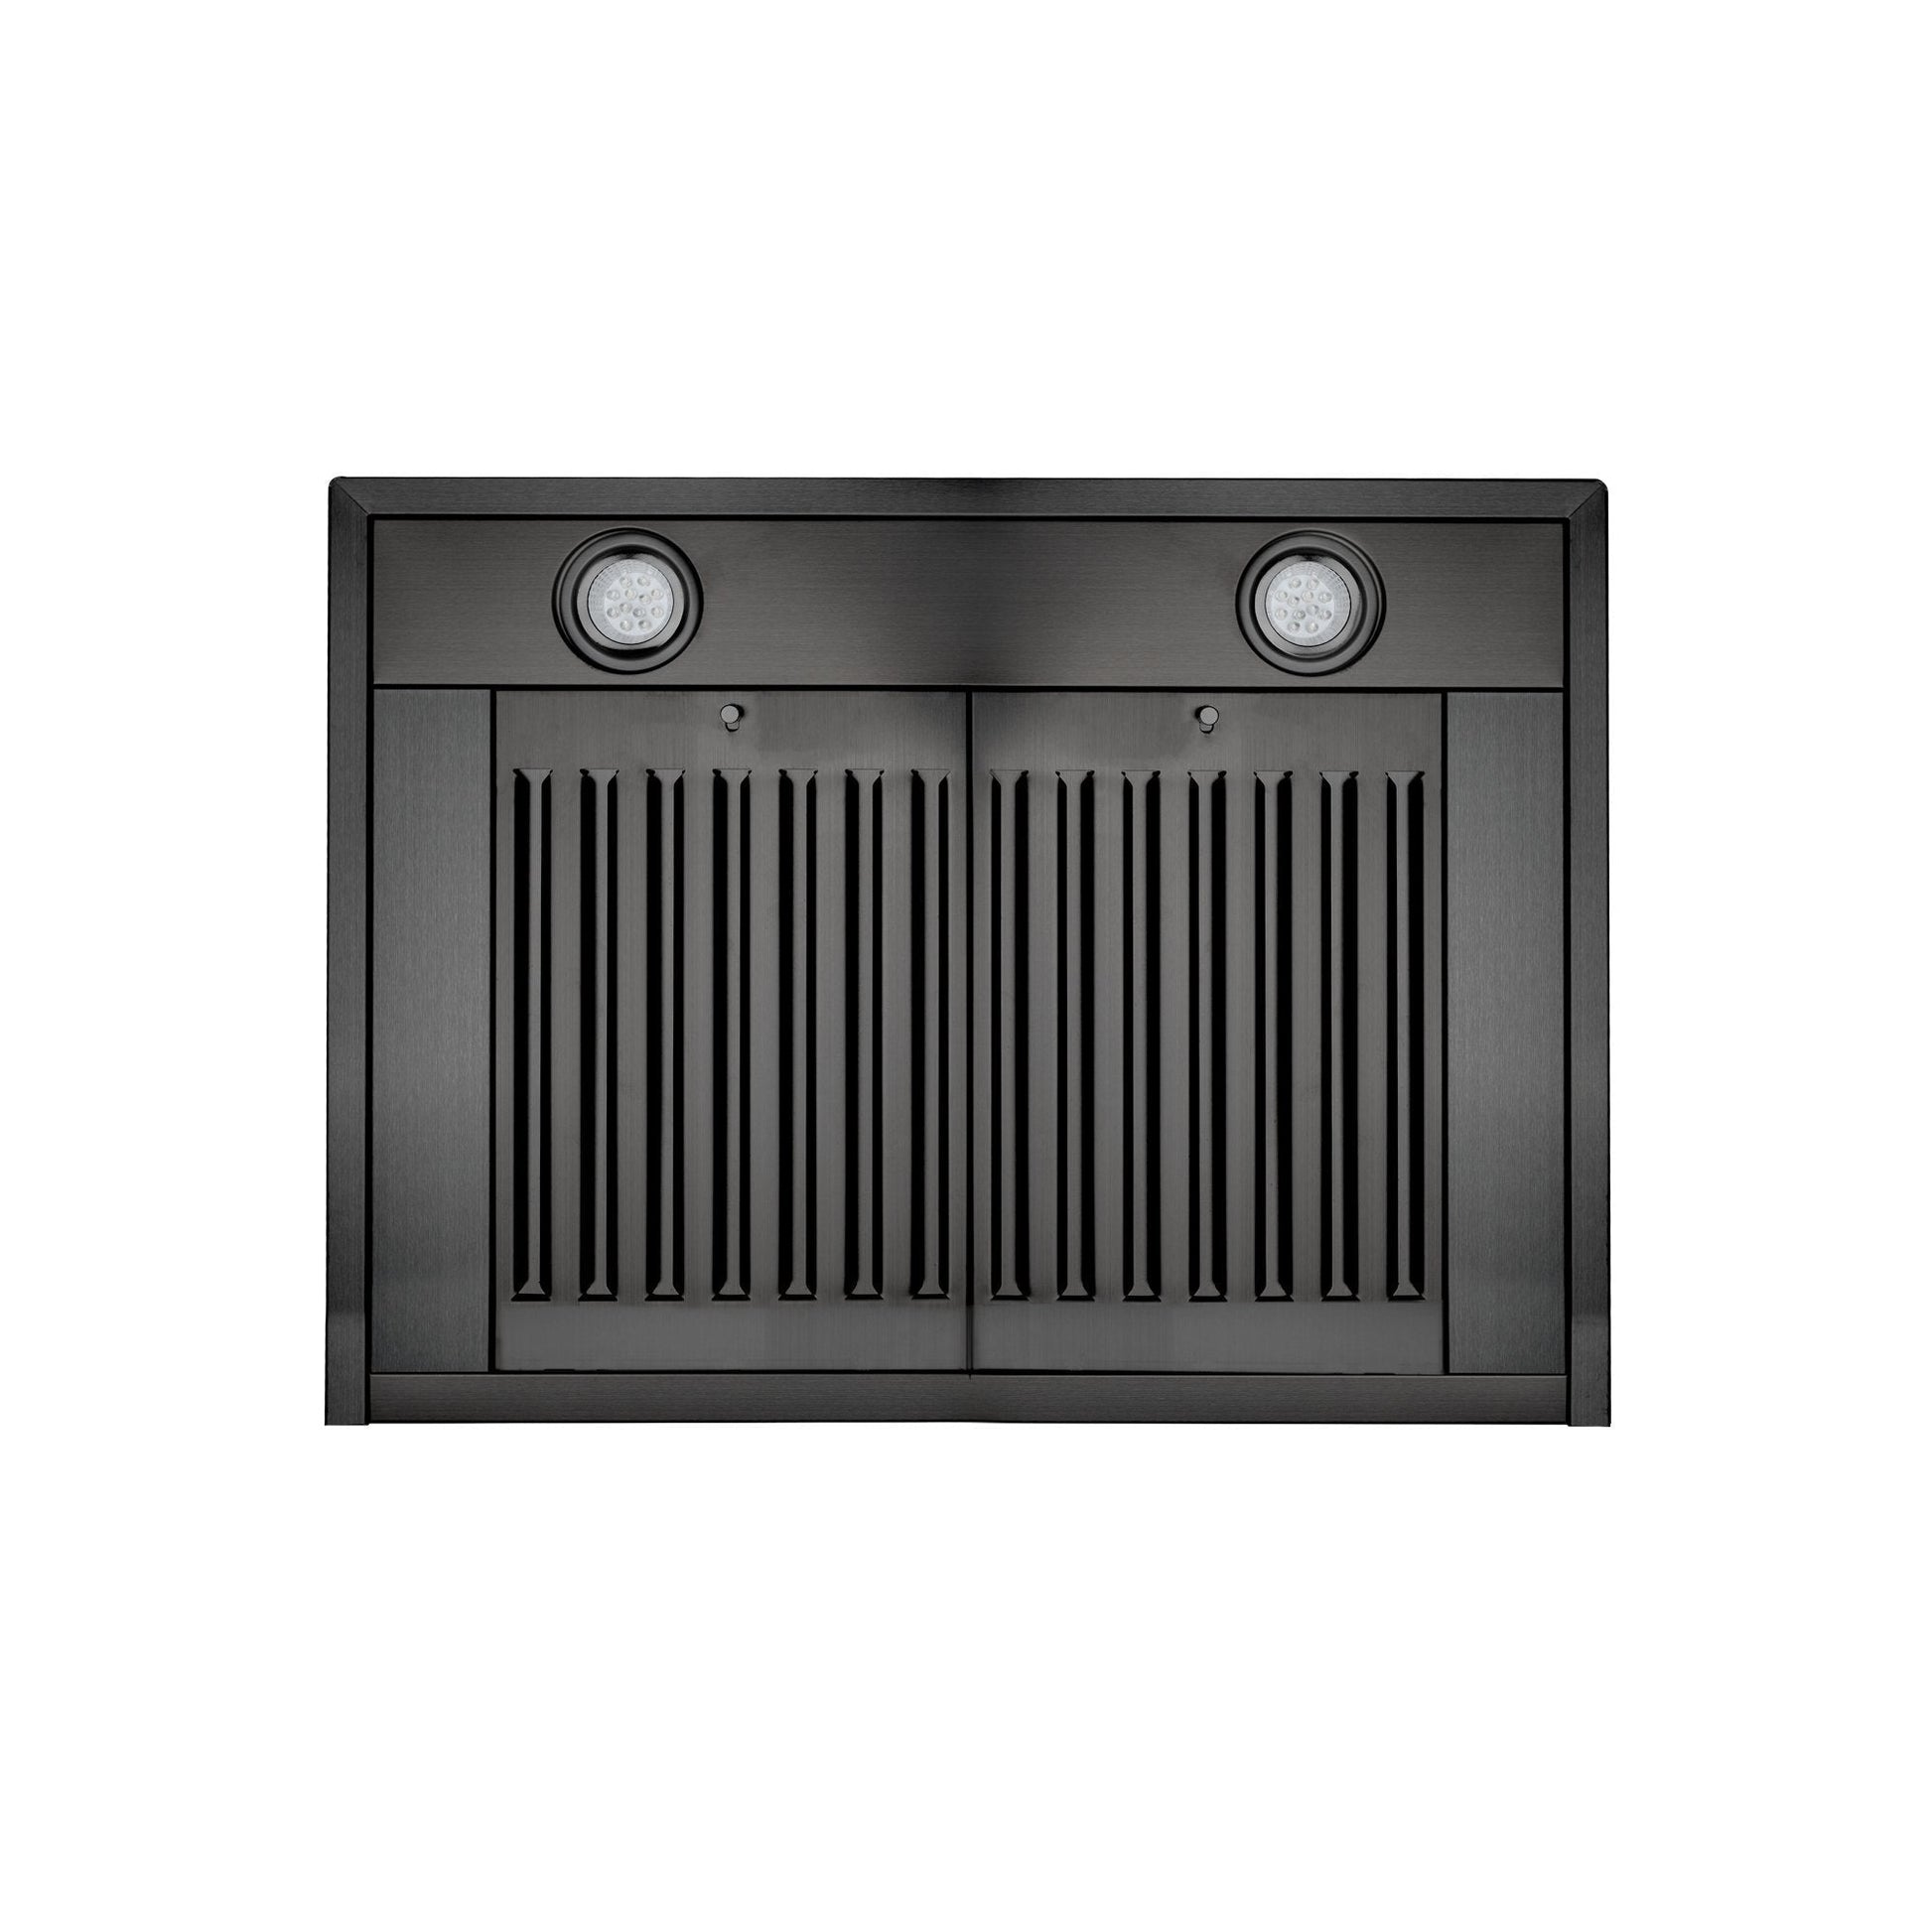 ZLINE Wall Mount Range Hood - Black Stainless Steel, Recirculating with Charcoal Filters